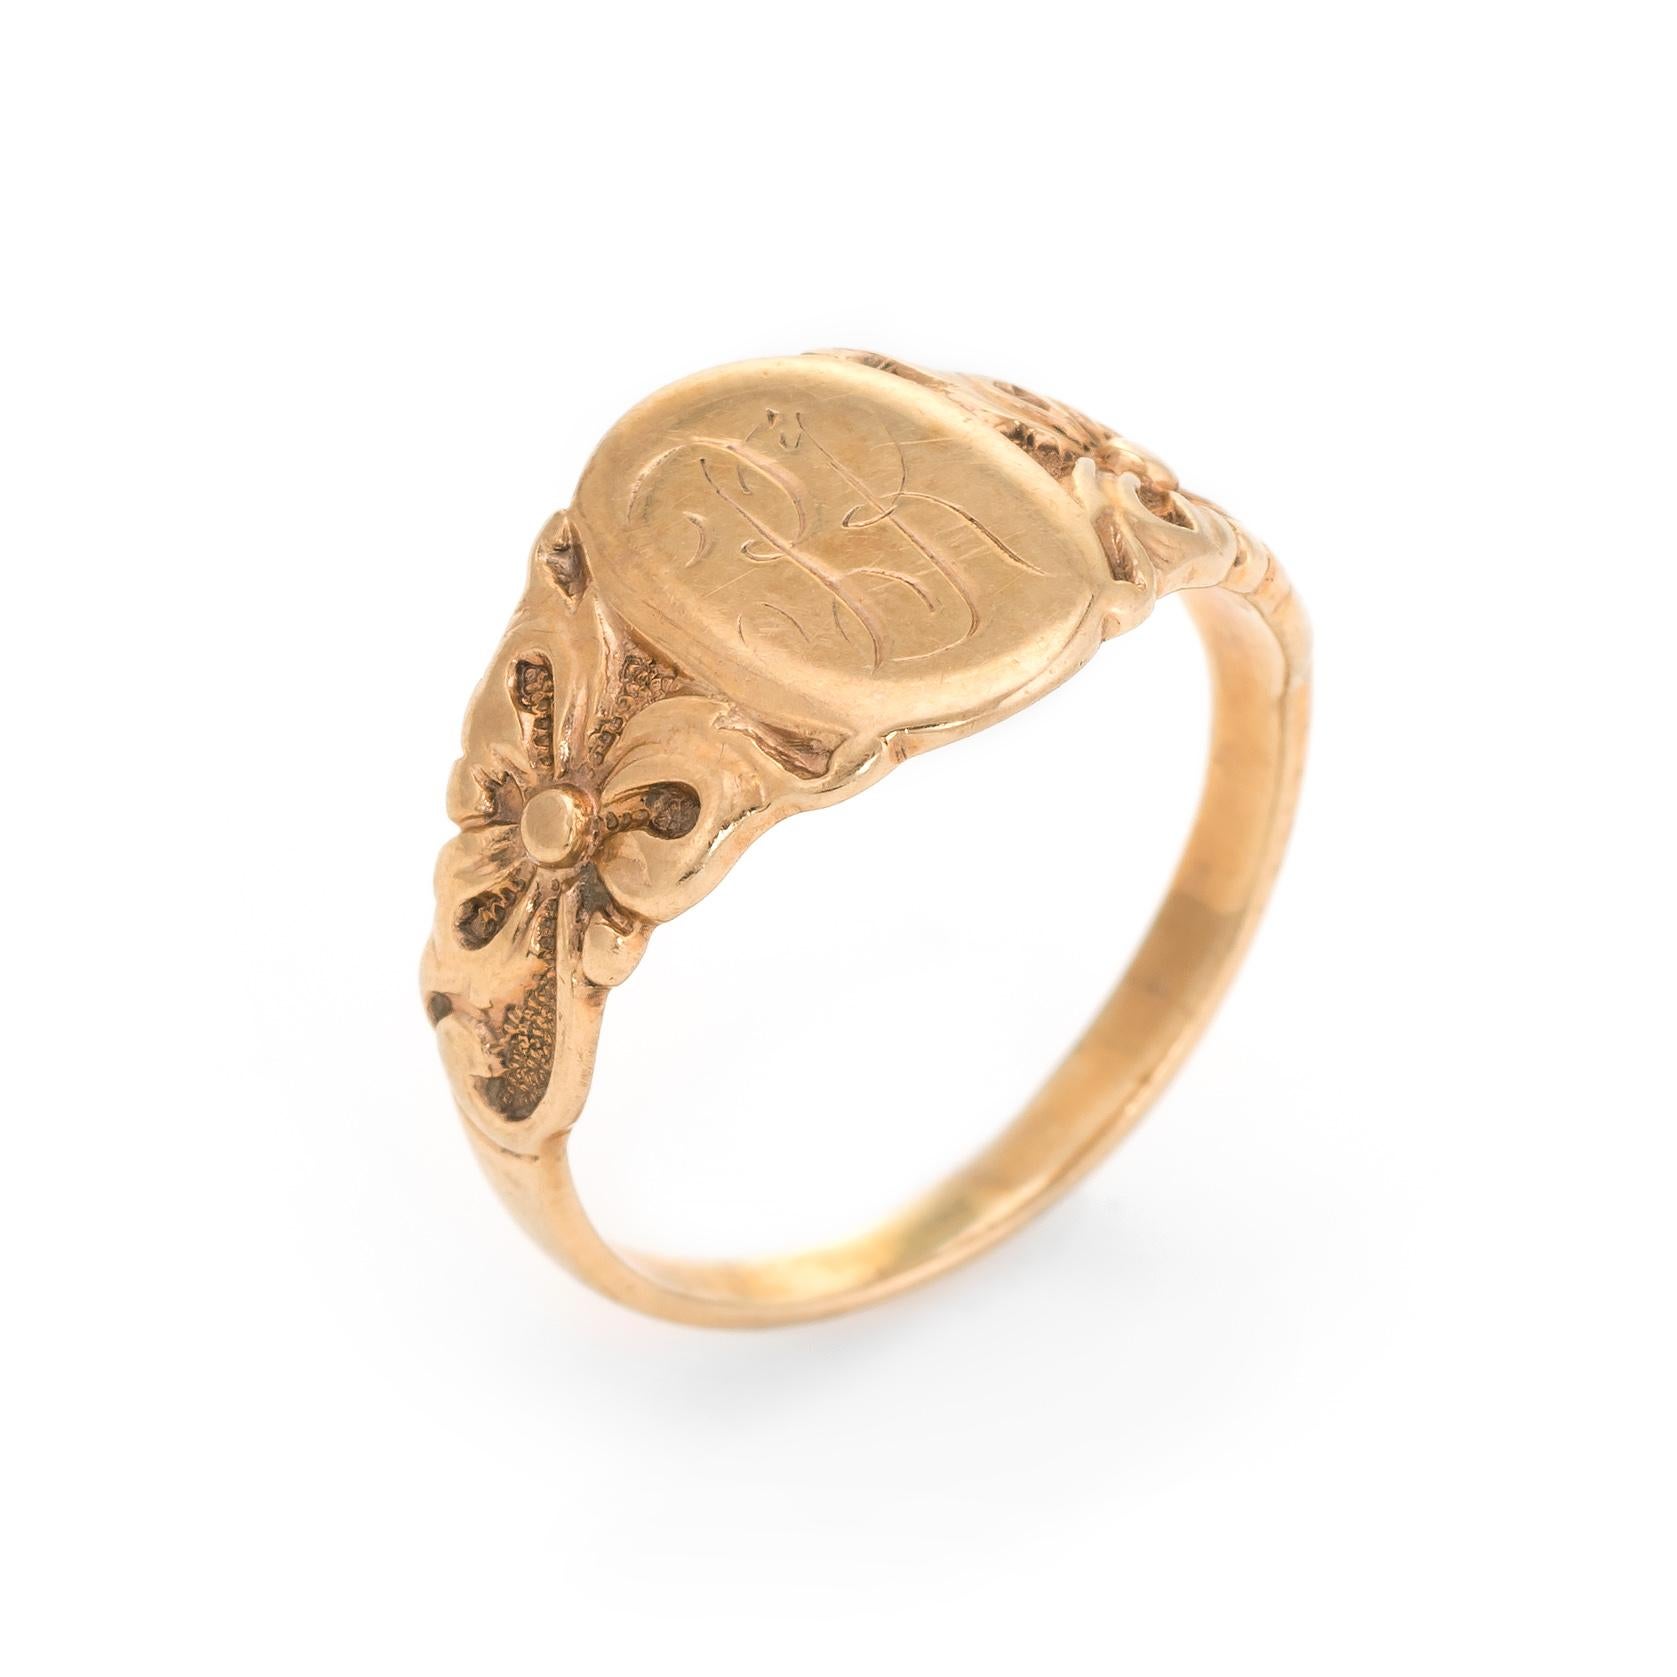 Lovely small antique Victorian signet ring (circa 1880s to 1900s), crafted in 10 karat rose gold. 

The center oval is inscribed with the initials 